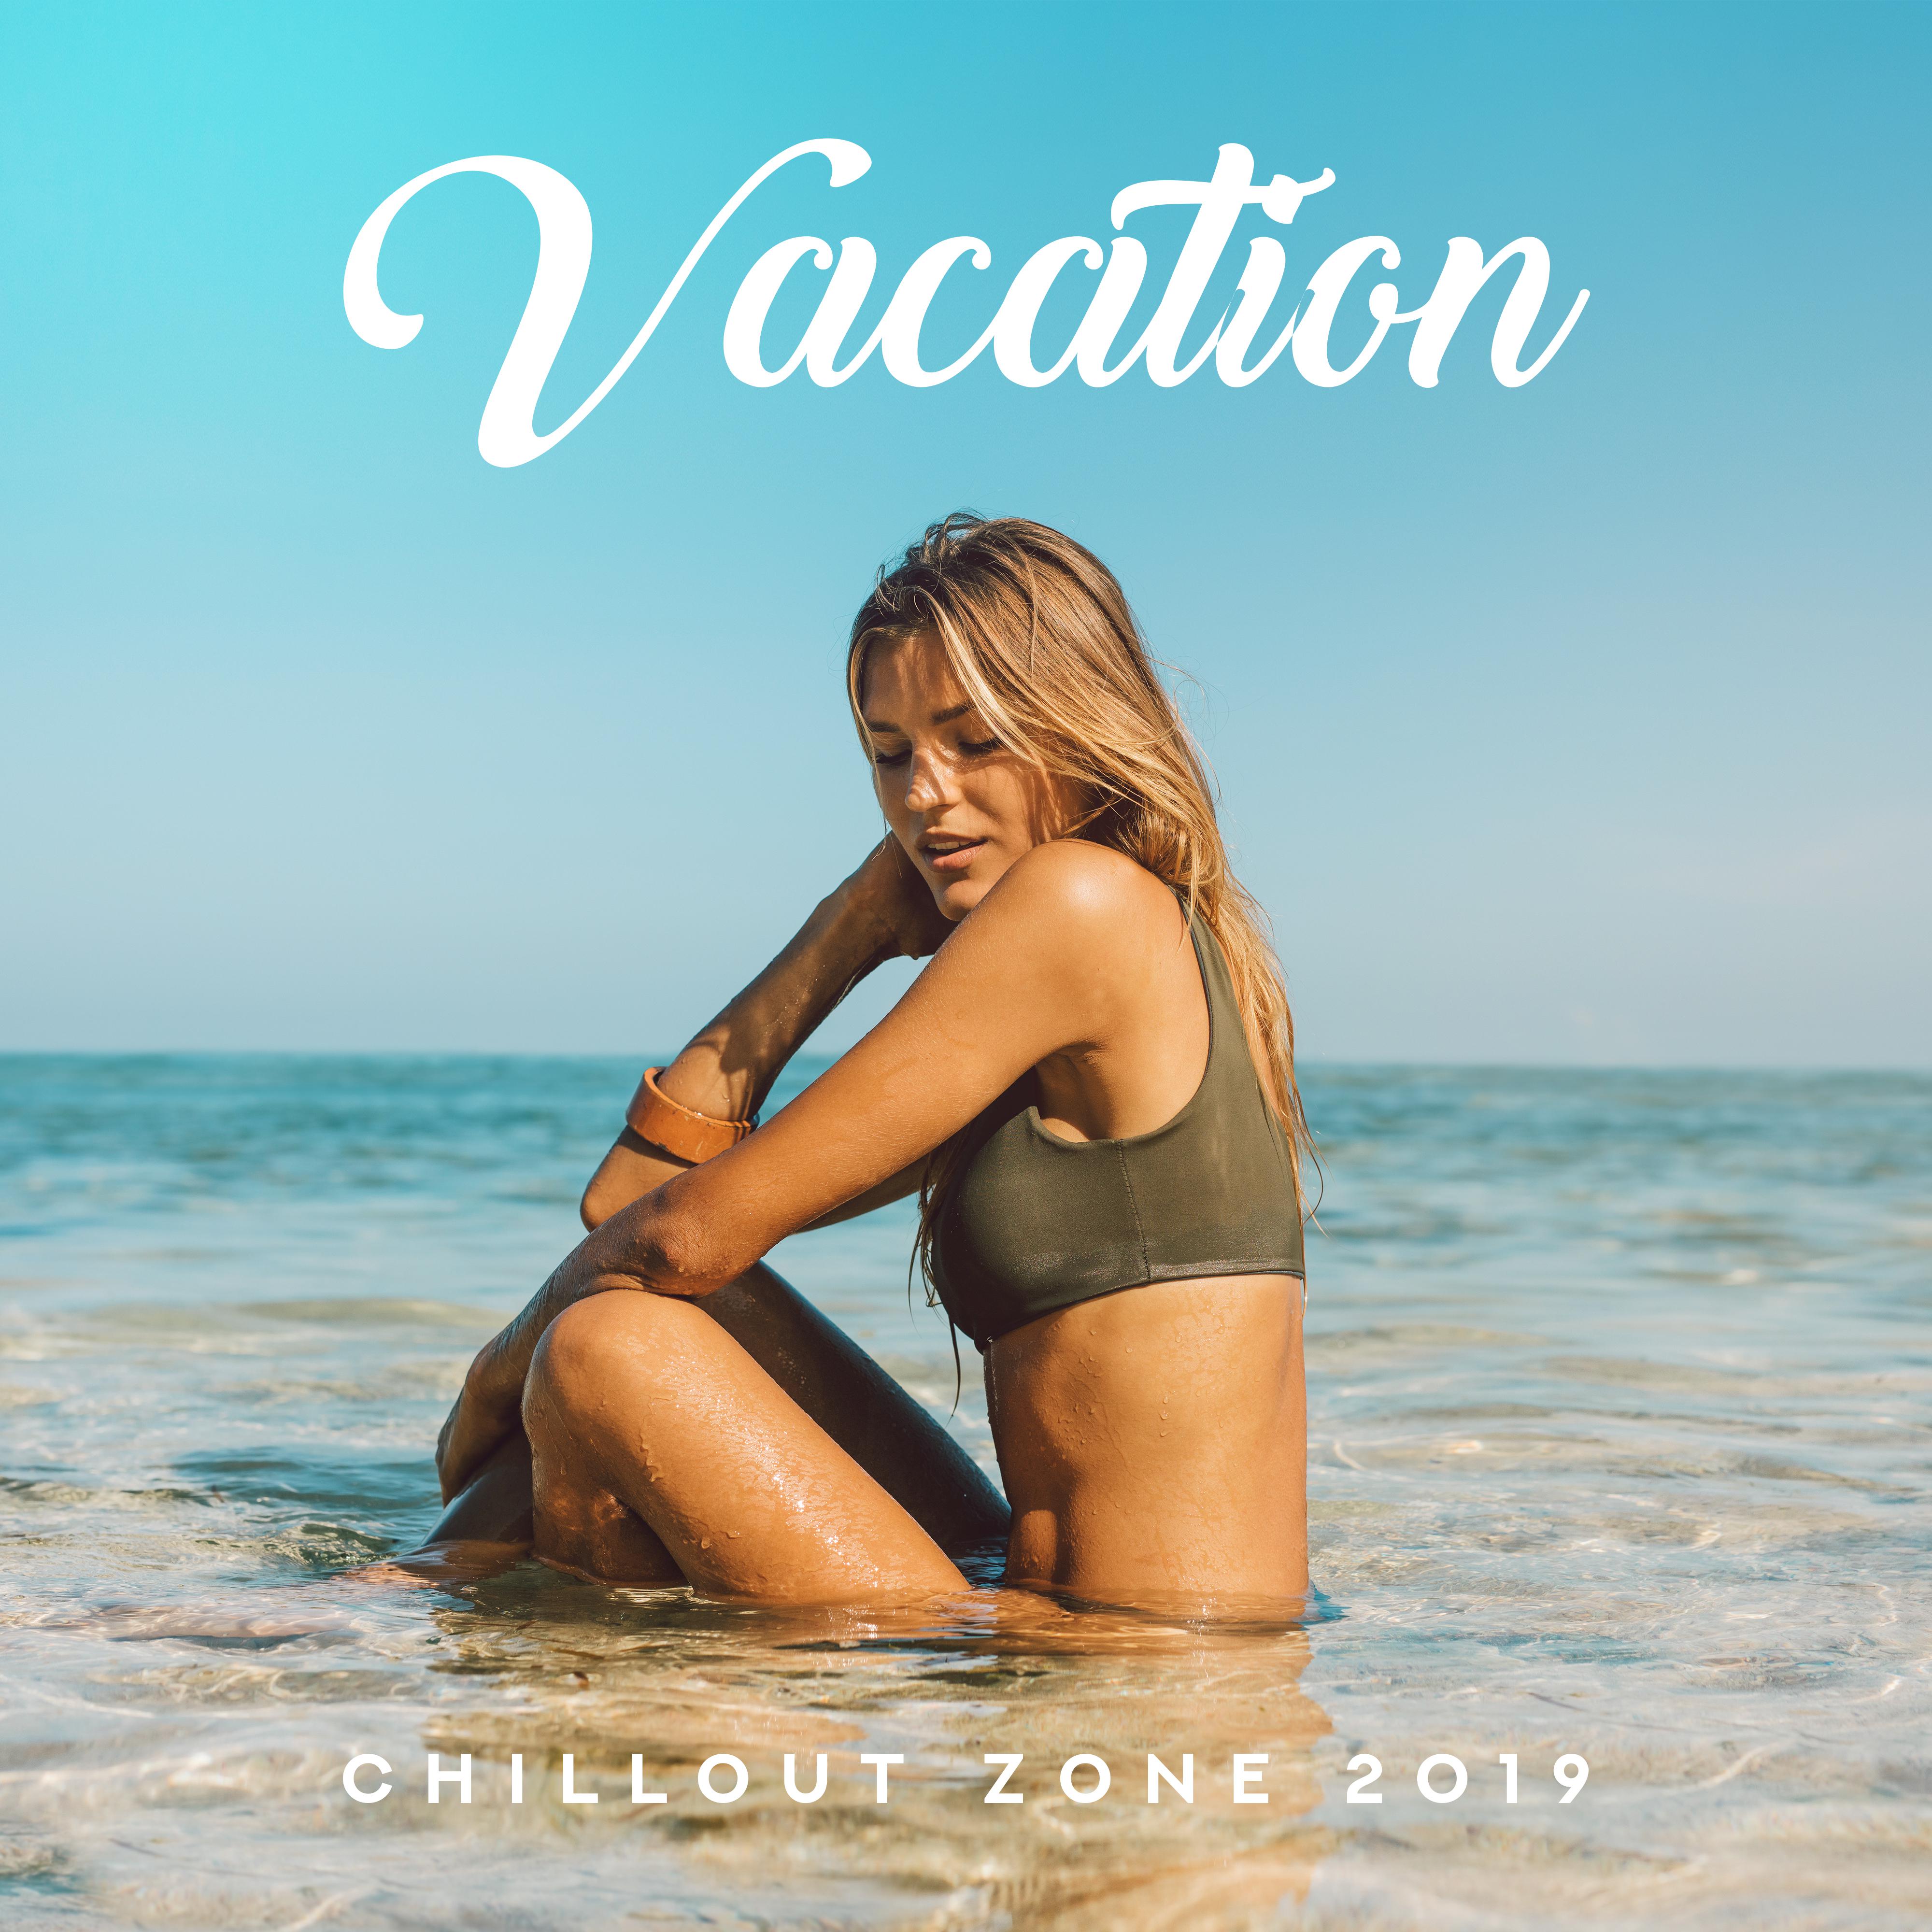 Vacation Chillout Zone 2019: Top Relaxing Chill Out Holiday Music Mix, 15 Songs to Full Rest & Calm Down, Tropical Beach Summer Vibes, Sunny Beach Lying, Sun Bathing & Drinking Colorful Drinks